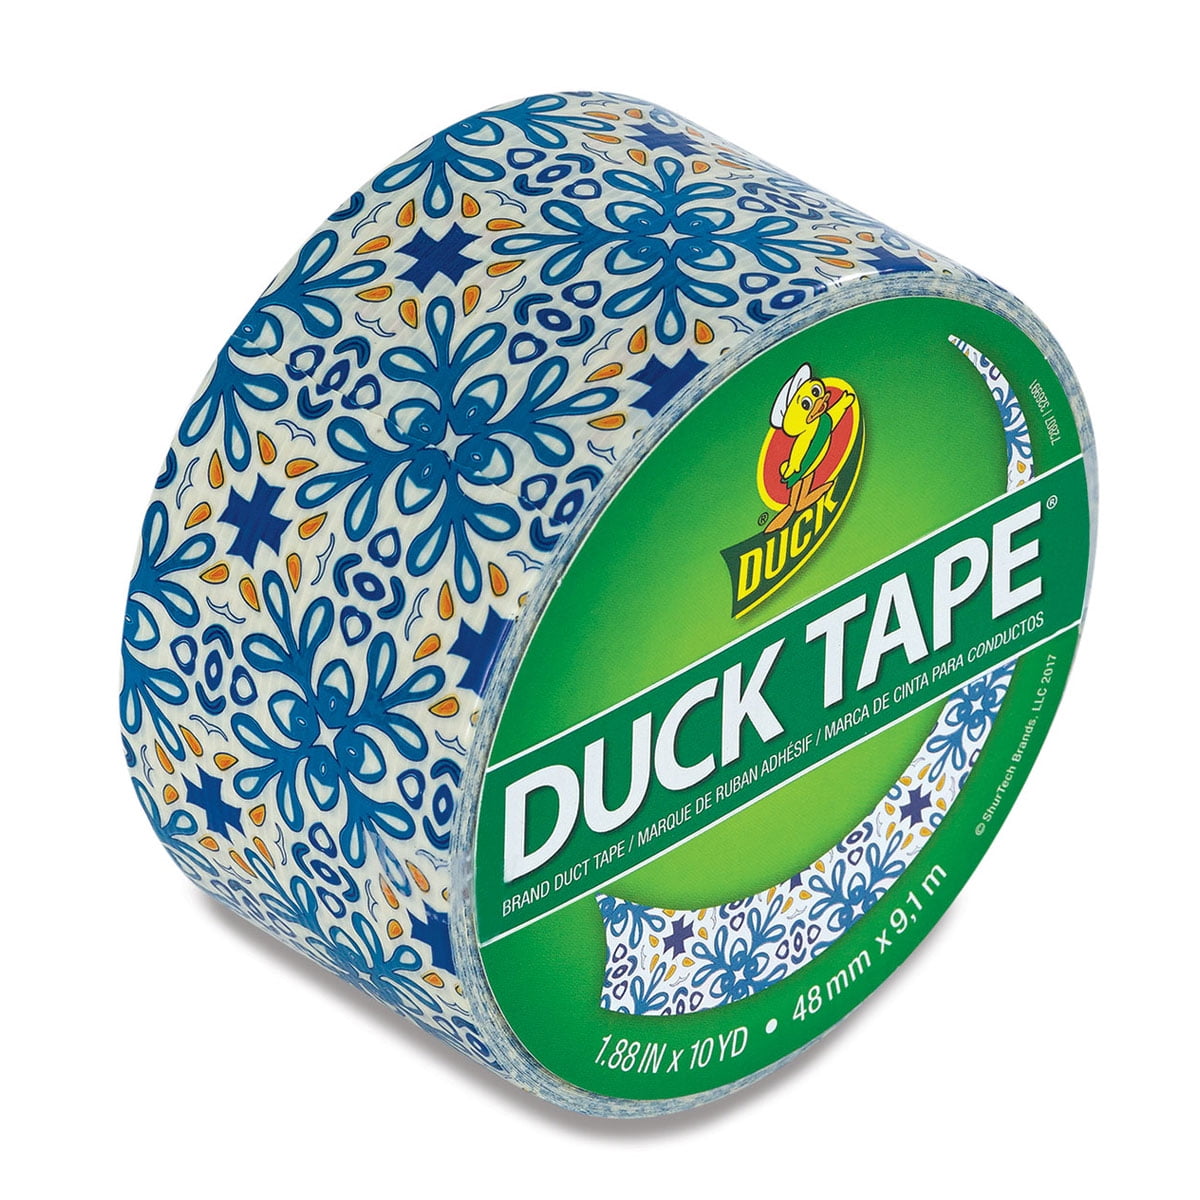 Other 11.39 x 11.65 Shurtech Patterned Duck Tape 1.88-inch x 10yd-Checkerboard 